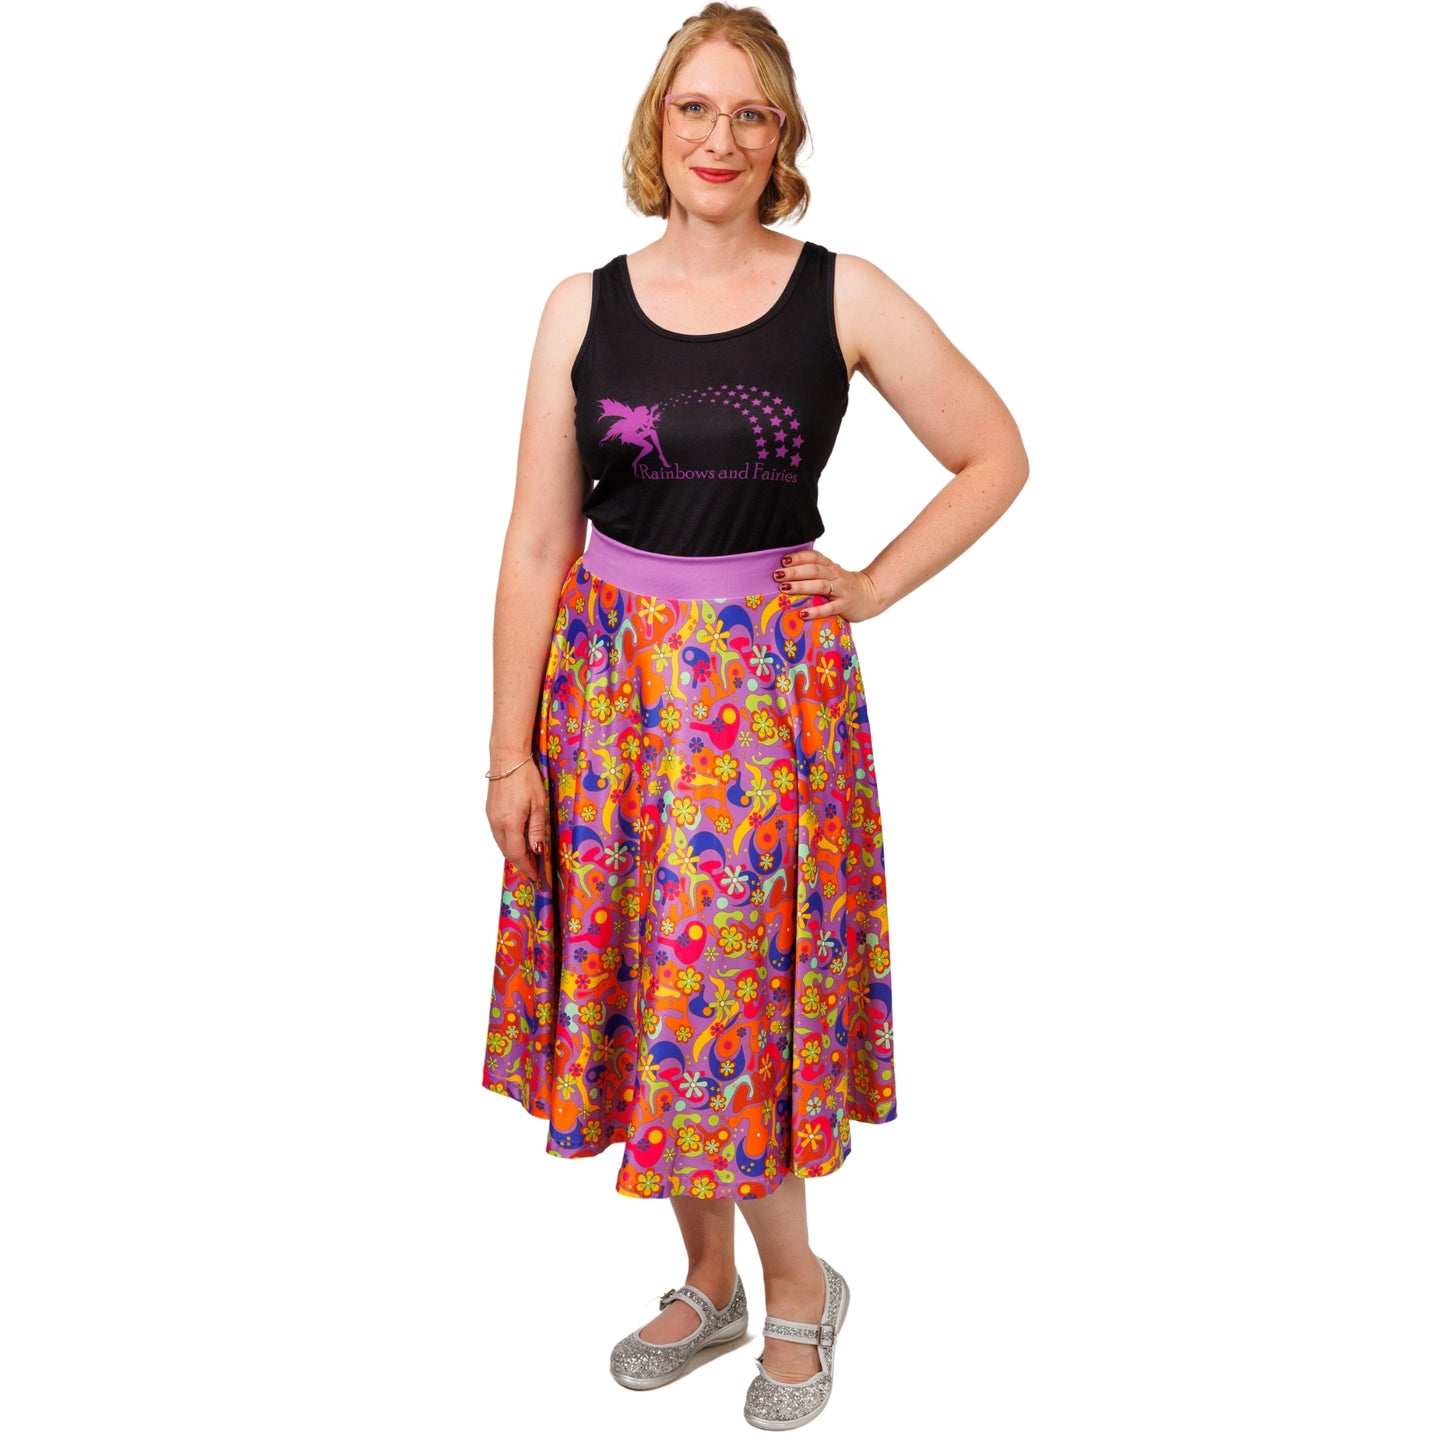 Flower Power Swishy Skirt by RainbowsAndFairies.com.au (Floral Print - Woodstock - Psychedelic - Circle Skirt - Kitsch - Retro - Skirt With Pockets) - SKU: CL_SWISH_FLOPO_ORG - Pic-02